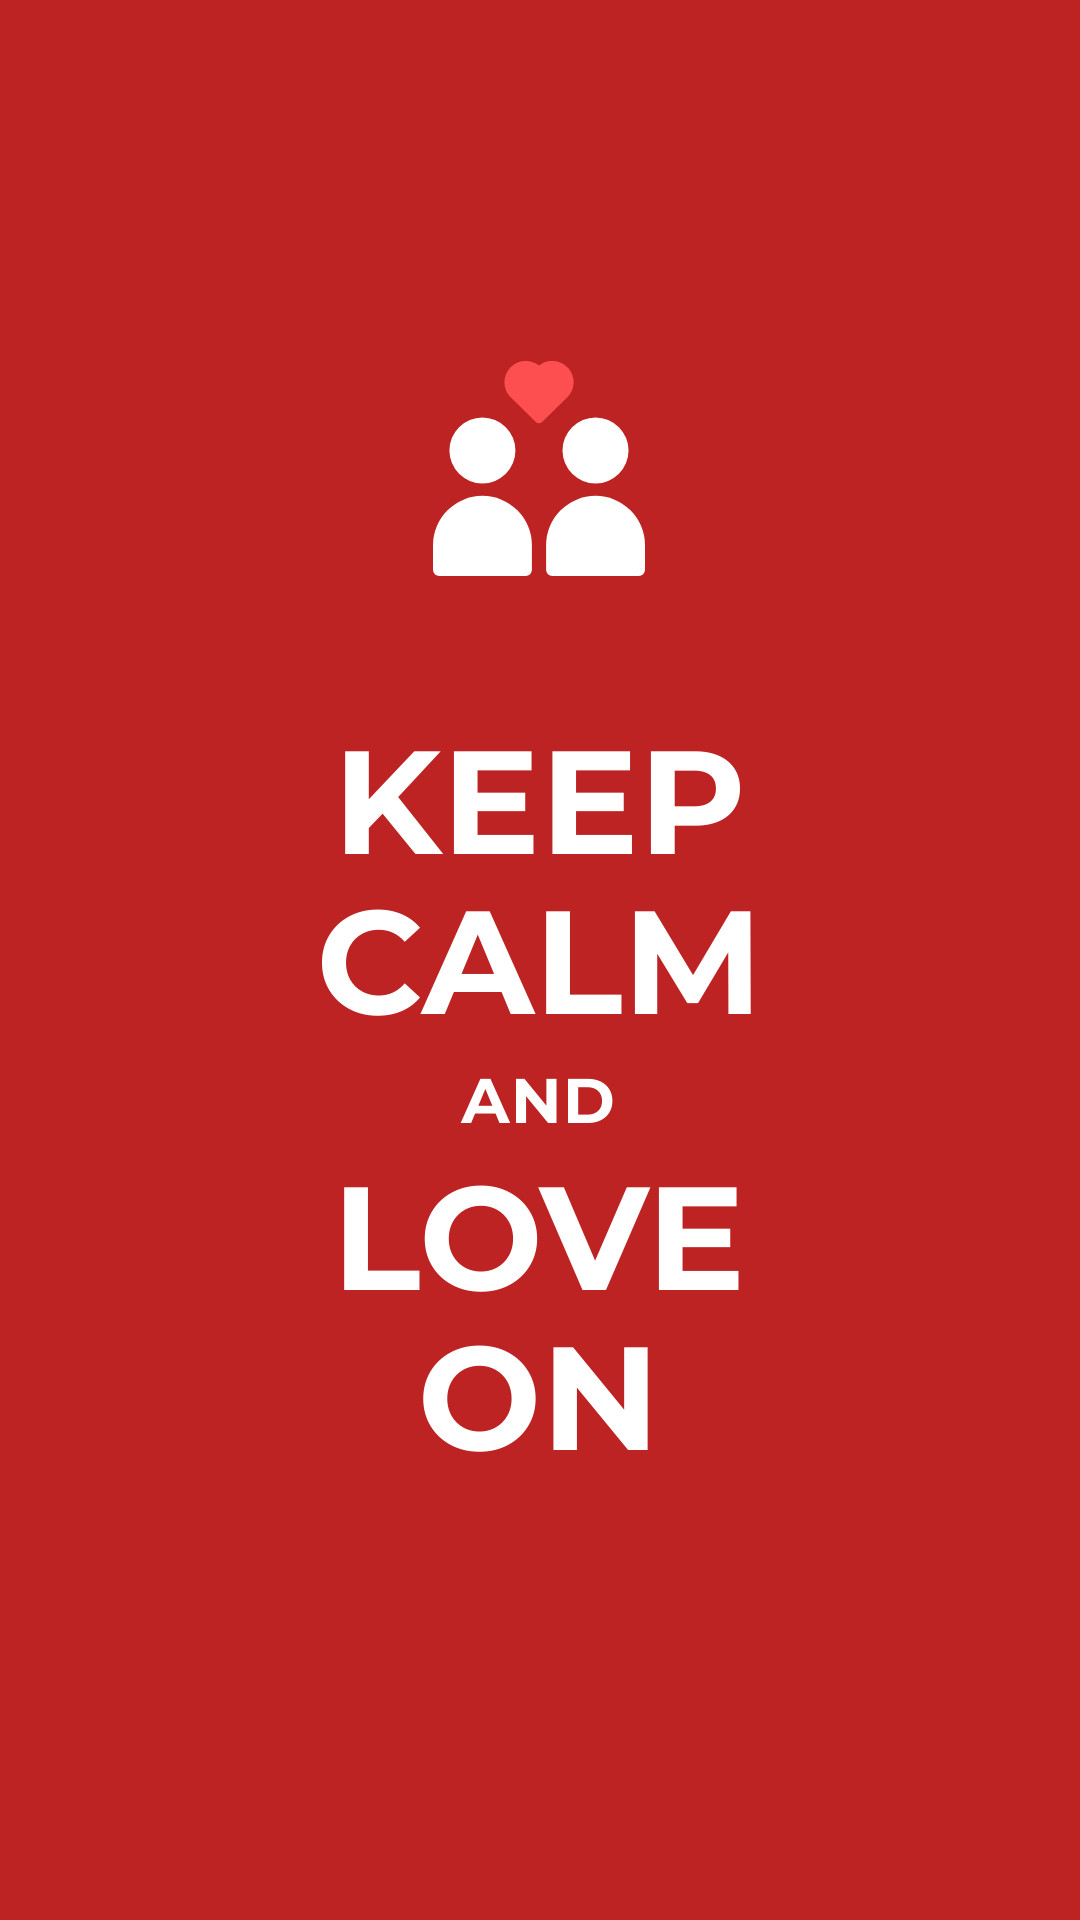 Keep Calm and Love On Facebook Sponsored Message 1200x628